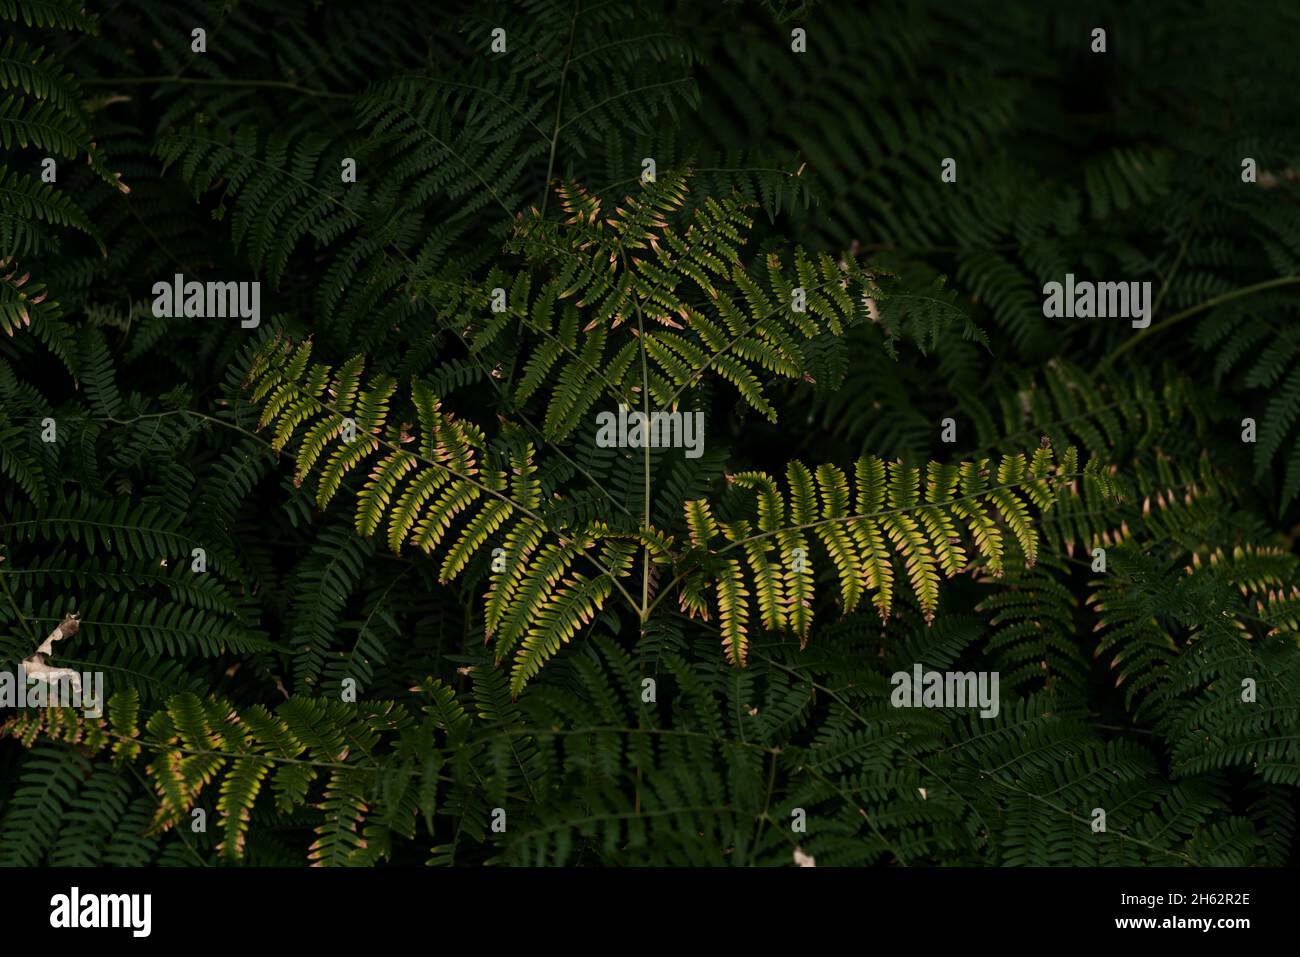 the little autumn,the fern slowly loses its green color,autumn beginning Stock Photo